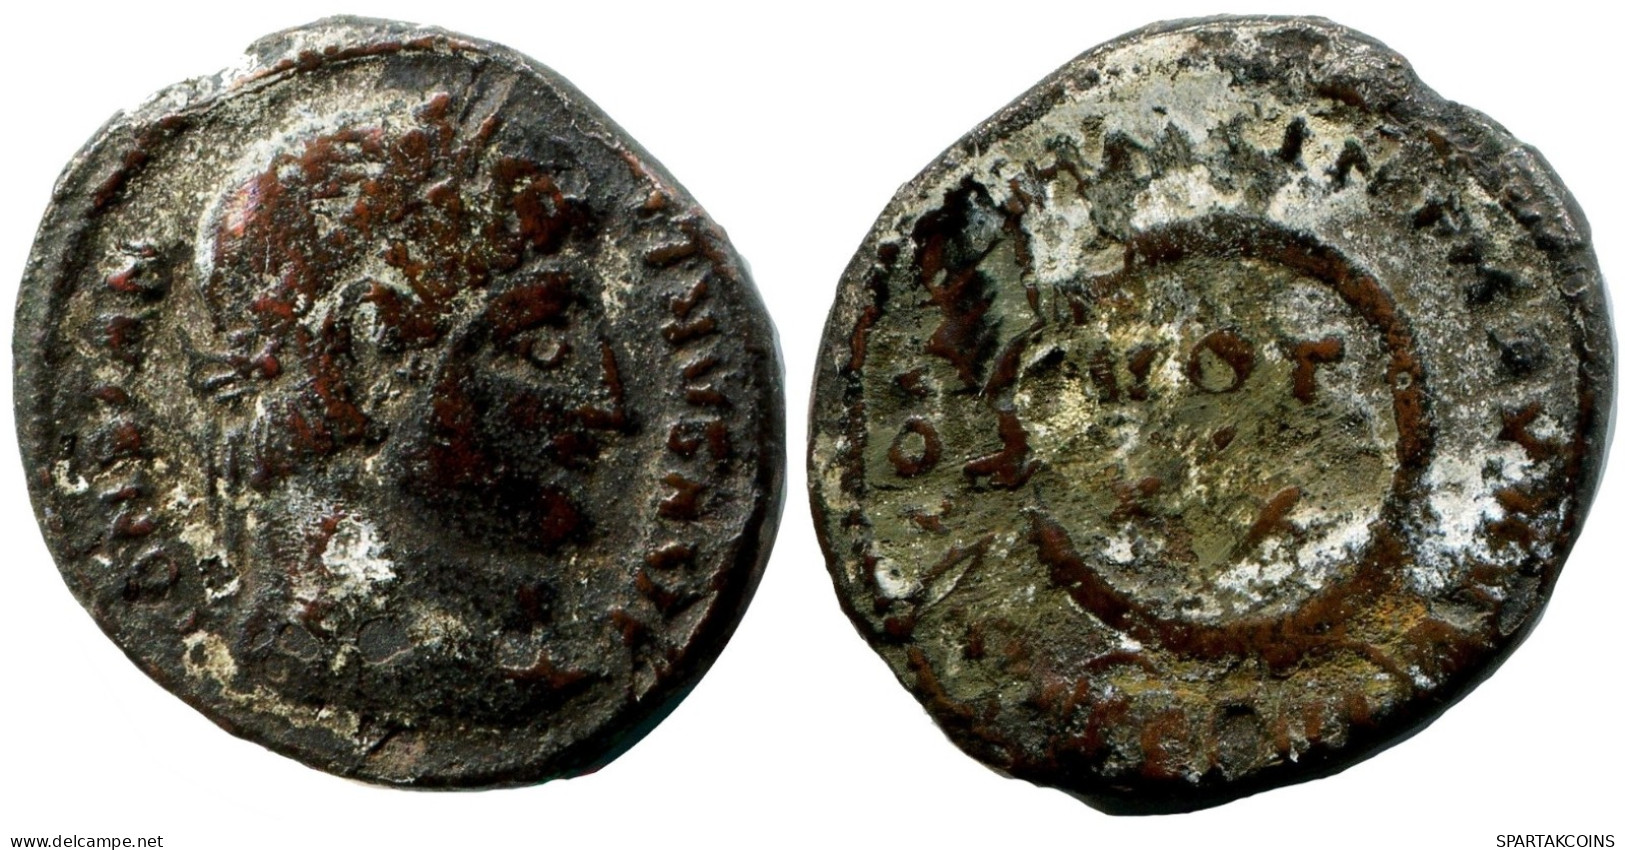 CONSTANTINE I THESSALONICA FROM THE ROYAL ONTARIO MUSEUM #ANC11113.14.D.A - El Imperio Christiano (307 / 363)